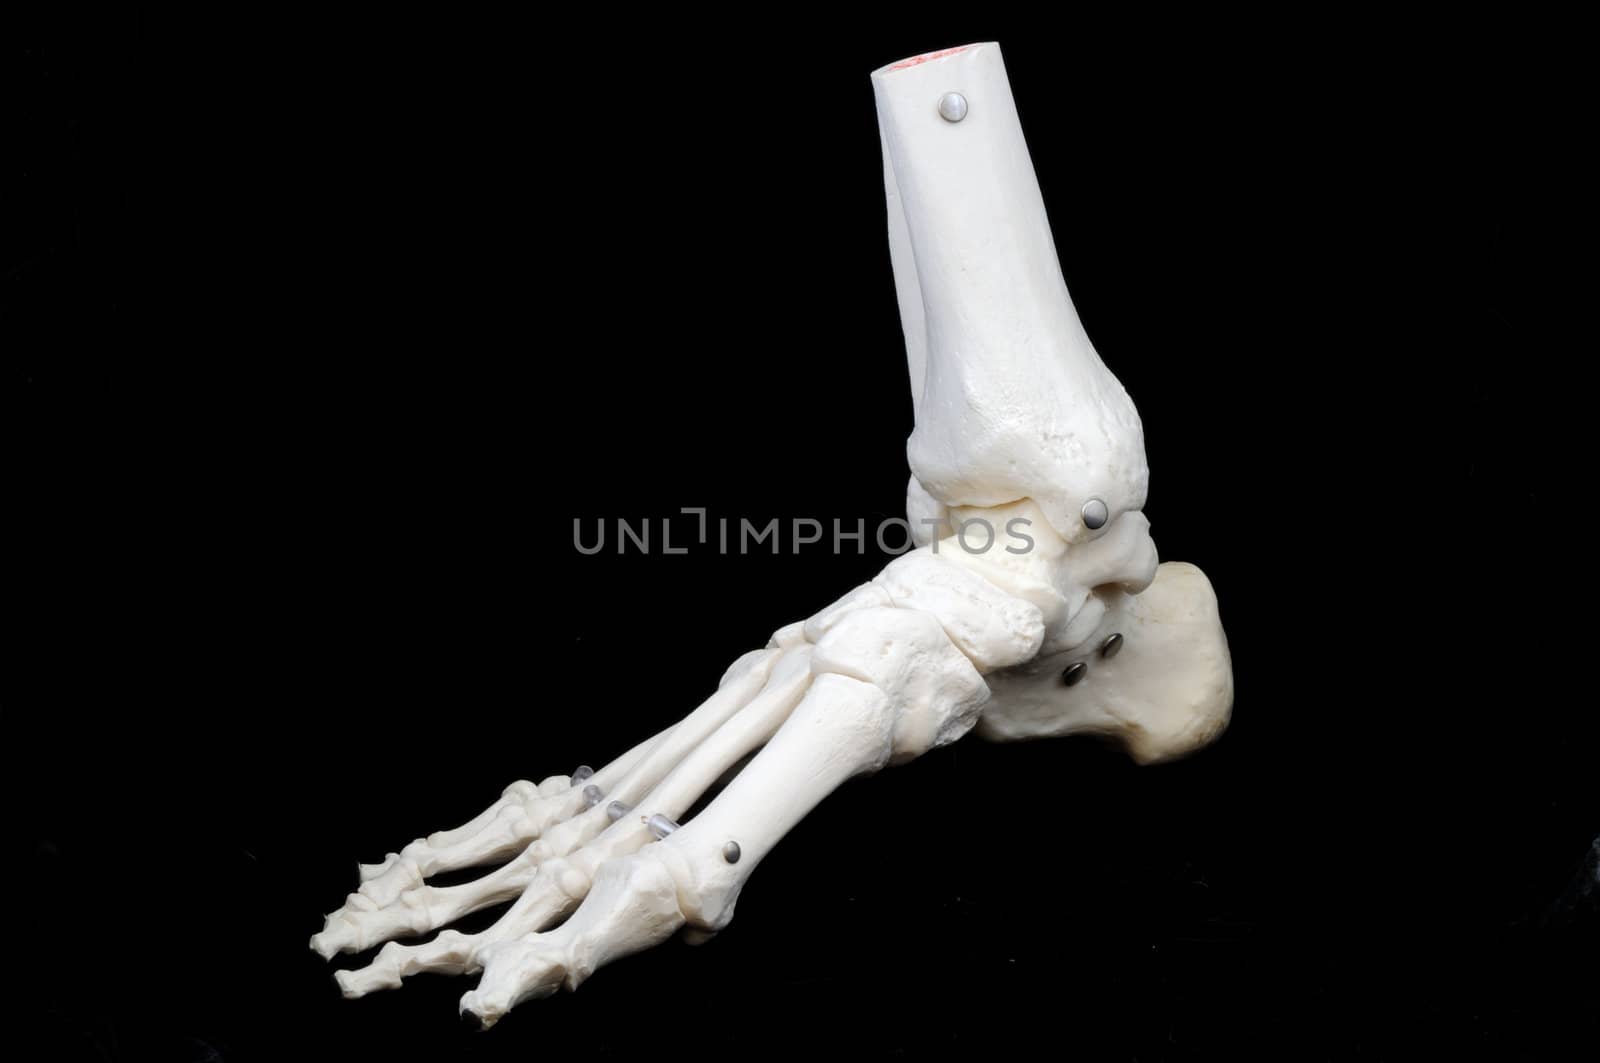 A highly detailed articulated model of a human foot, with all the bones represented, from the toes to just past the ankle.